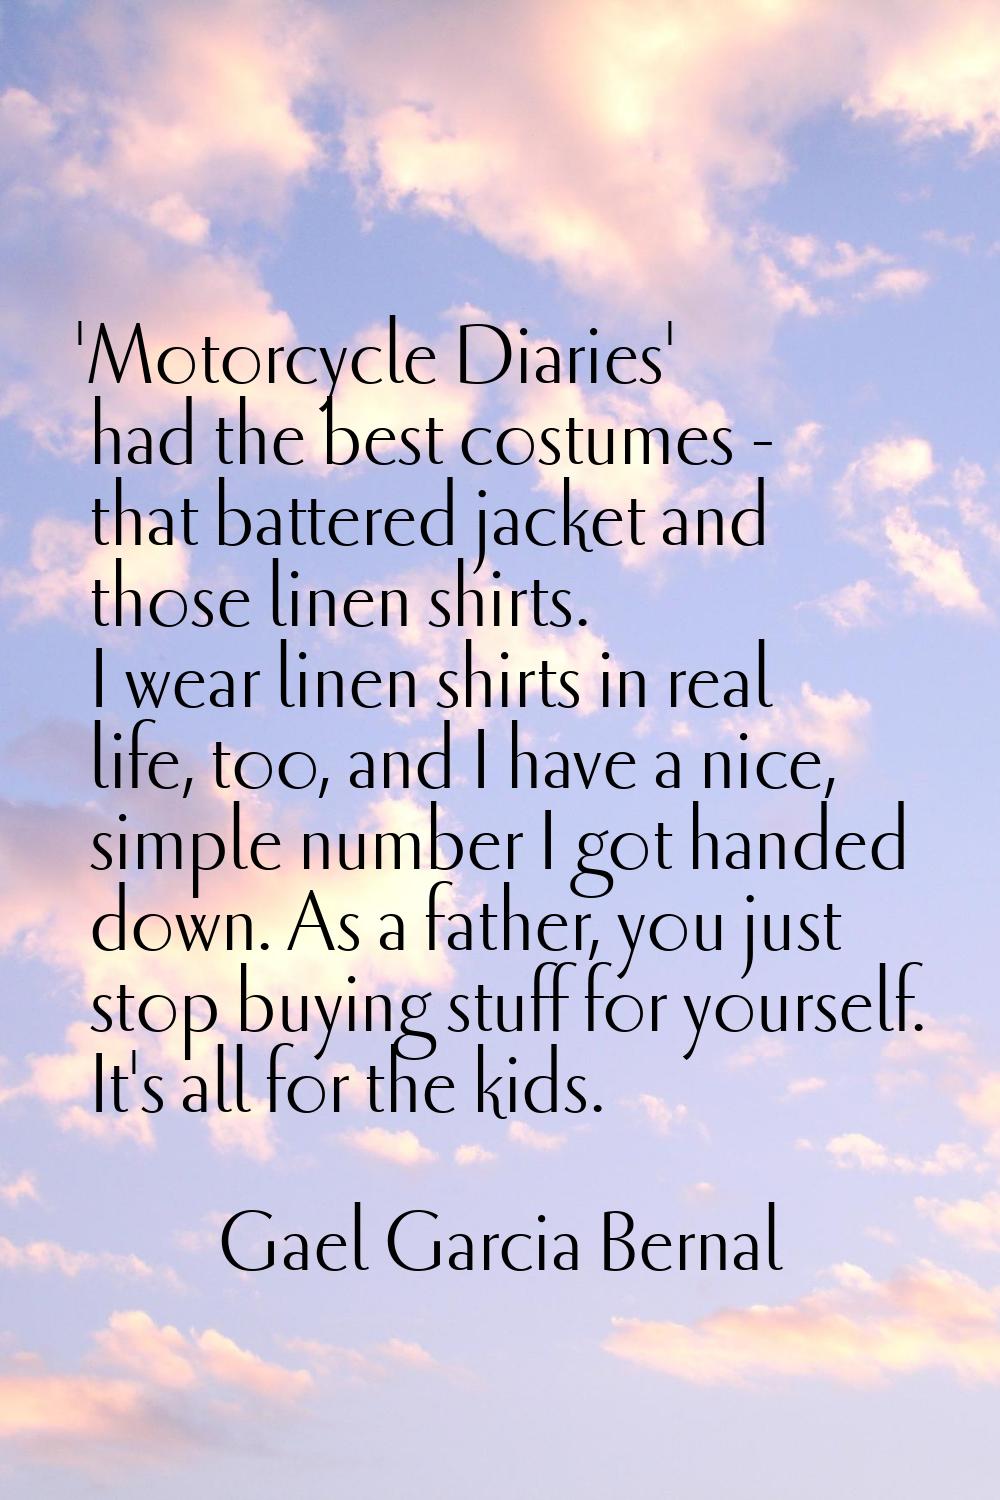 'Motorcycle Diaries' had the best costumes - that battered jacket and those linen shirts. I wear li